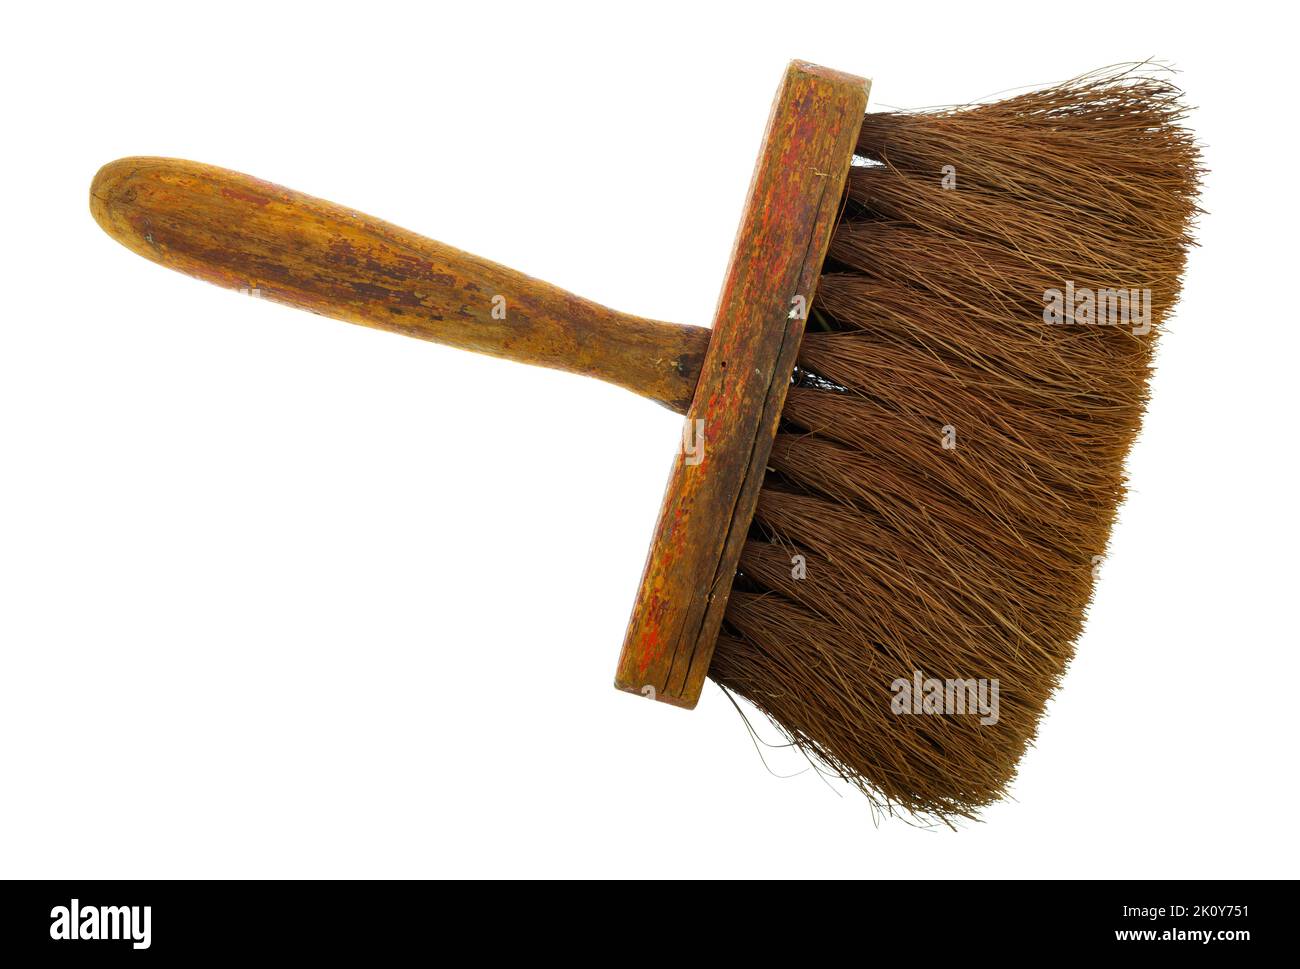 Top view of a vintage paste brush for wallpapering isolated on a white background. Stock Photo